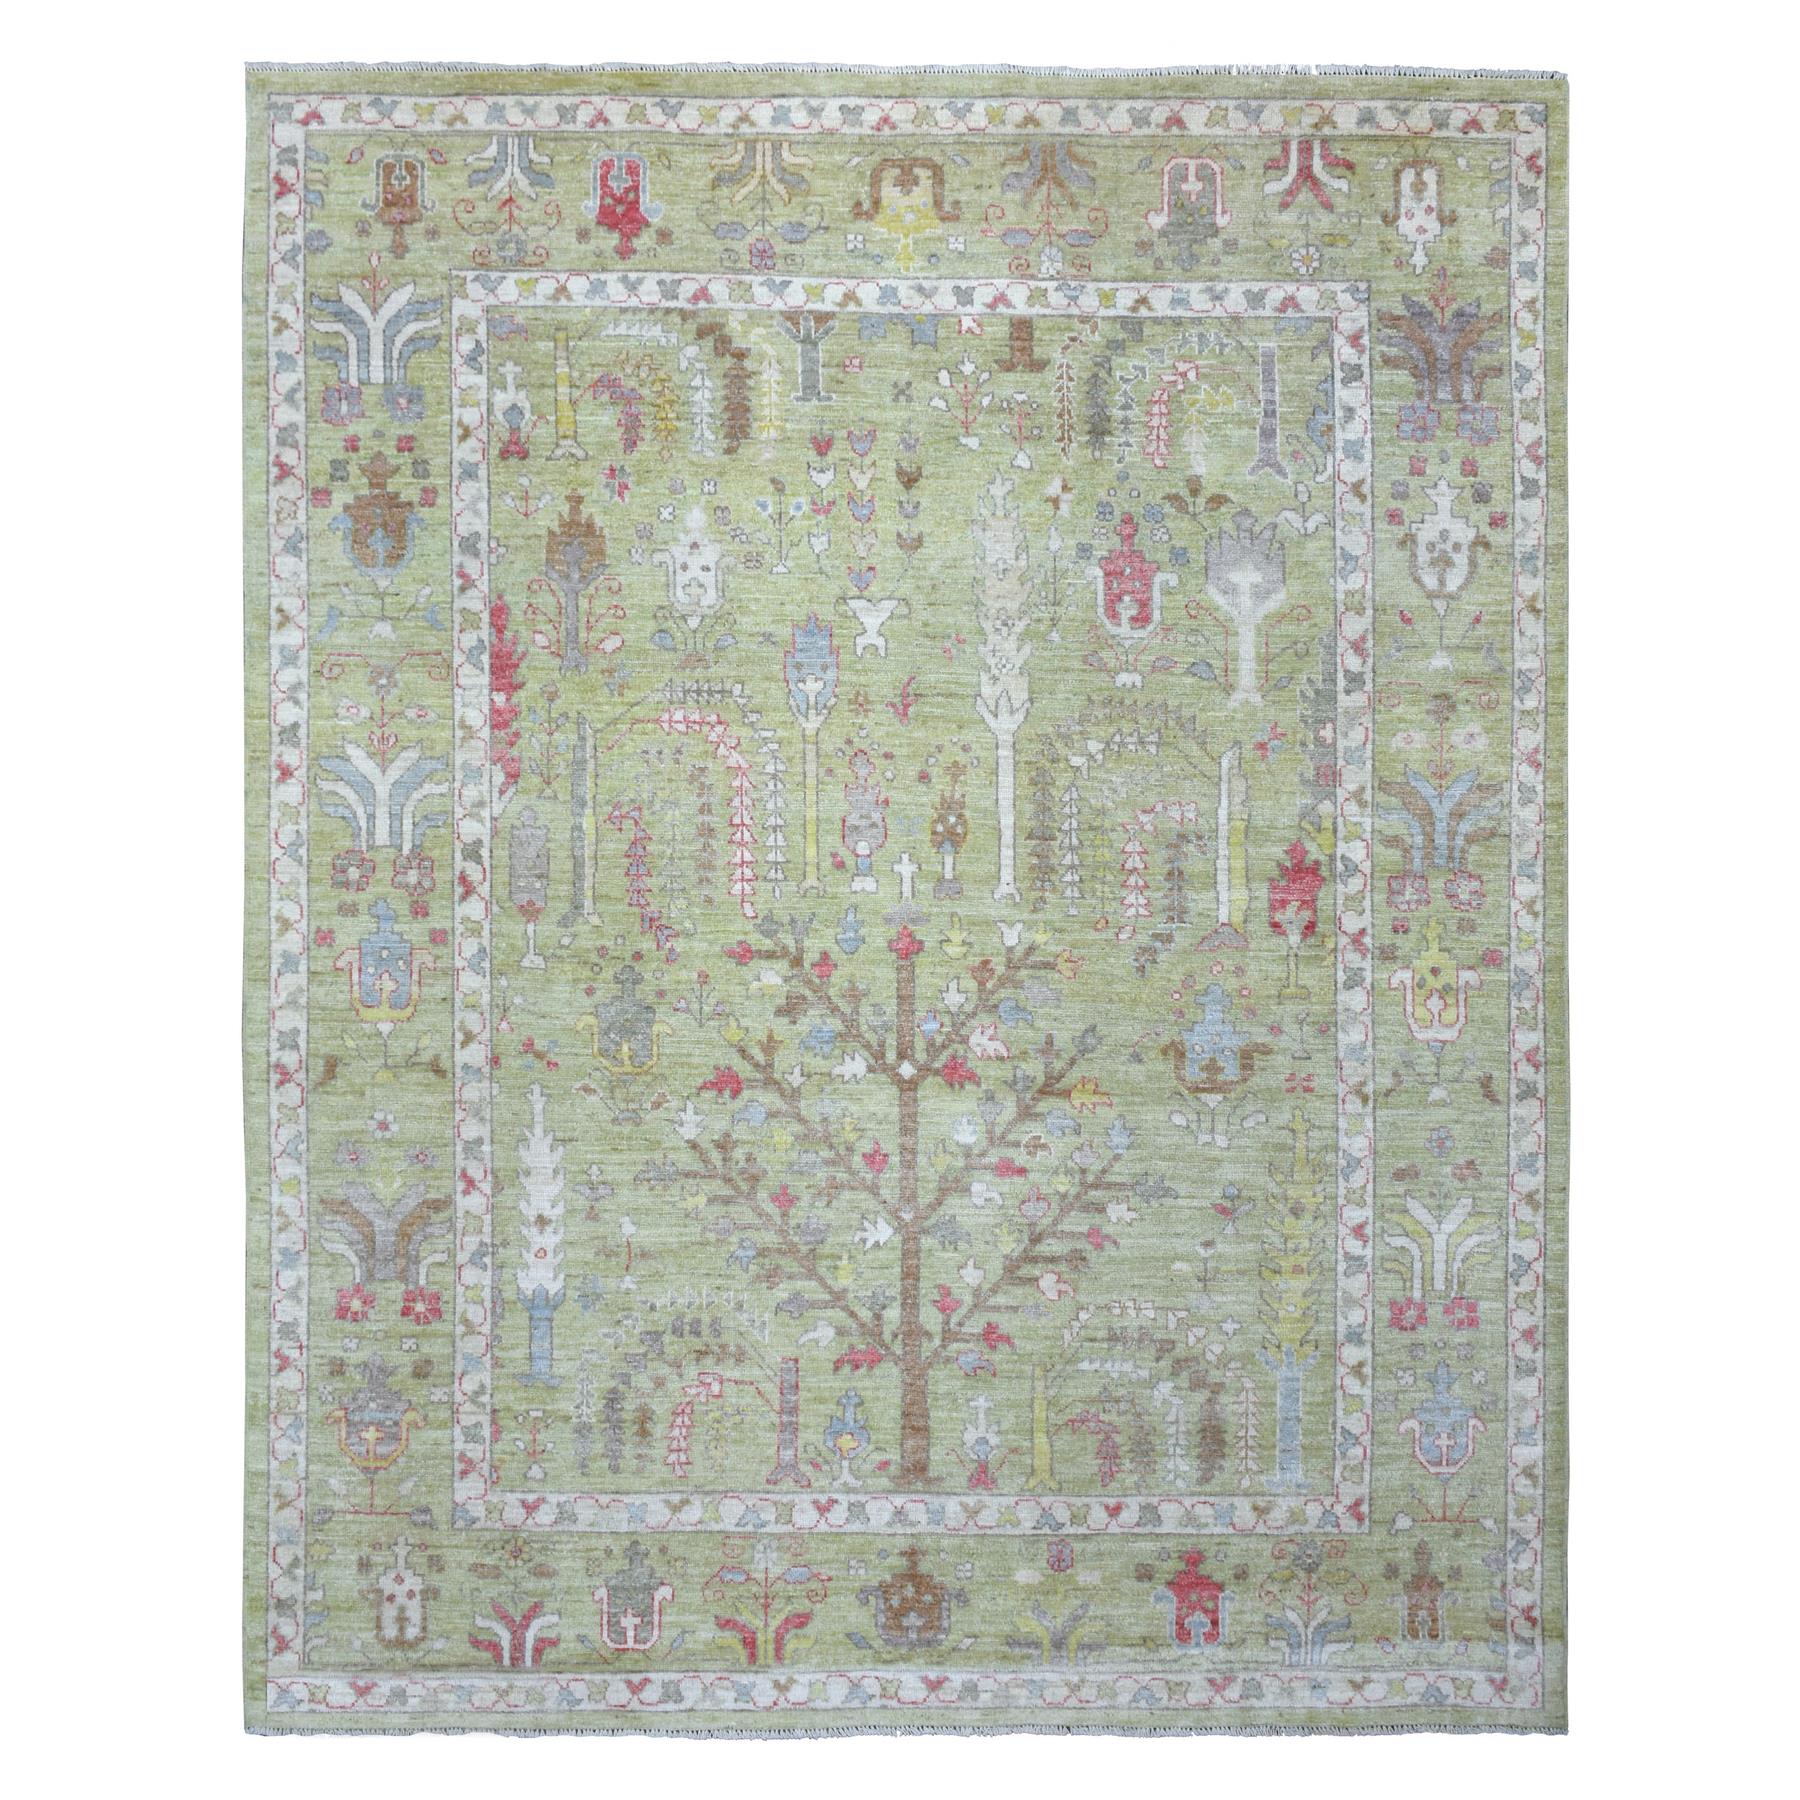 8'x10' Green Angora Oushak With Colorful Leaf Design Natural Dyes, Afghan Wool Hand Woven Oriental Rug 